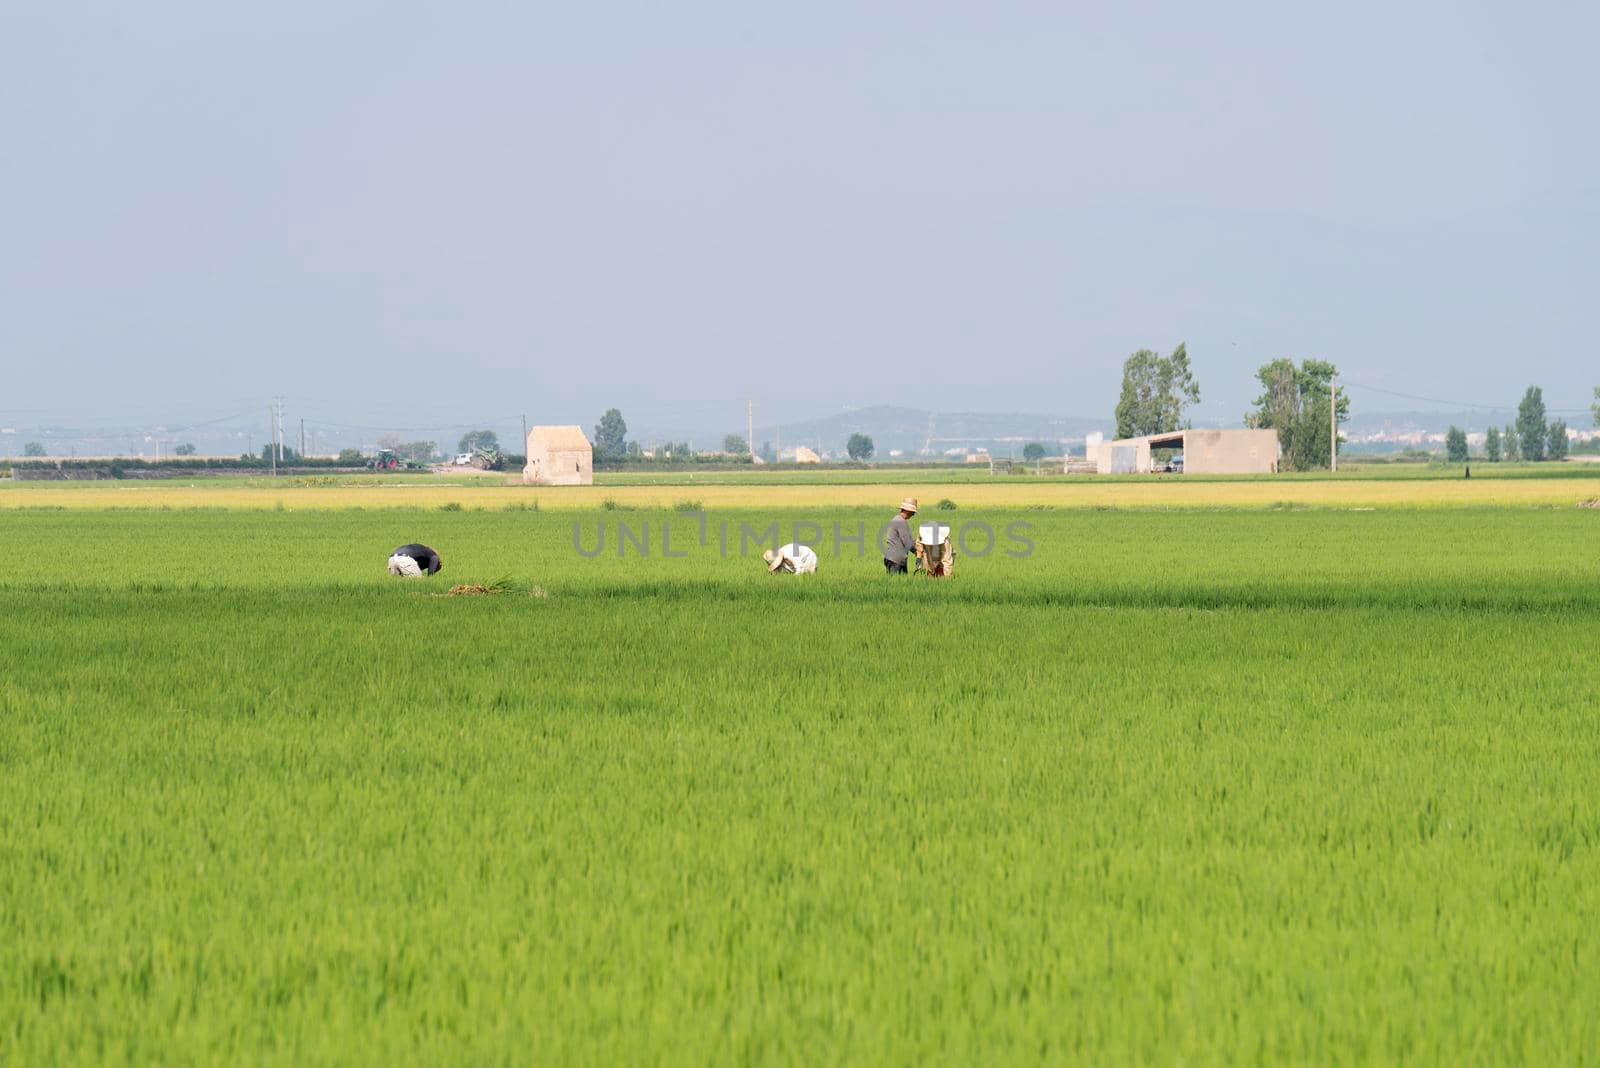 Some unrecognized Farmers working in rice field